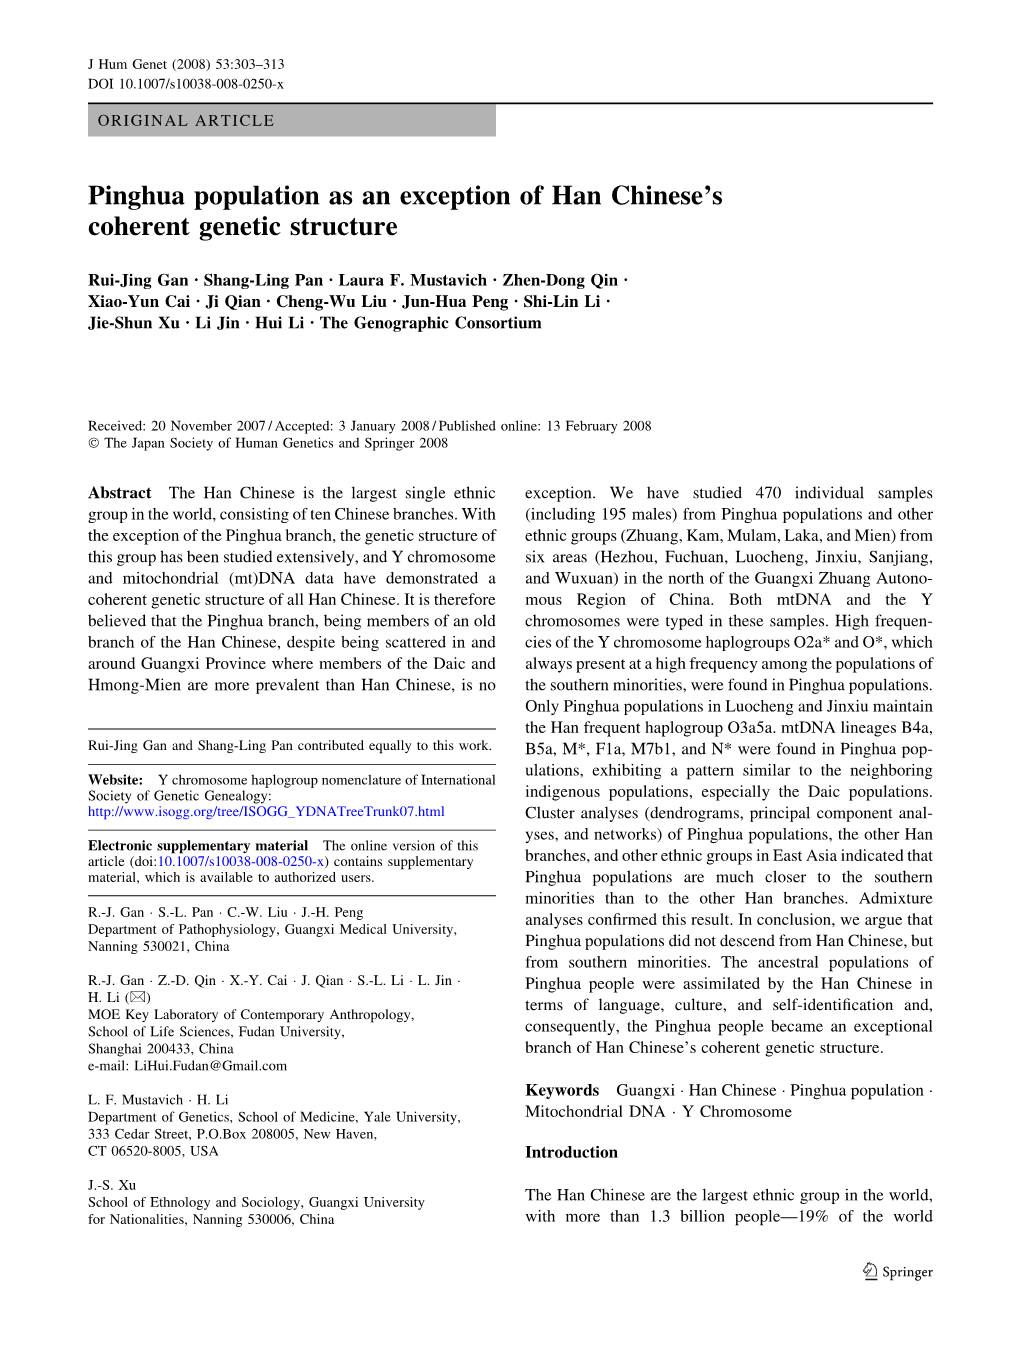 Pinghua Population As an Exception of Han Chinese's Coherent Genetic